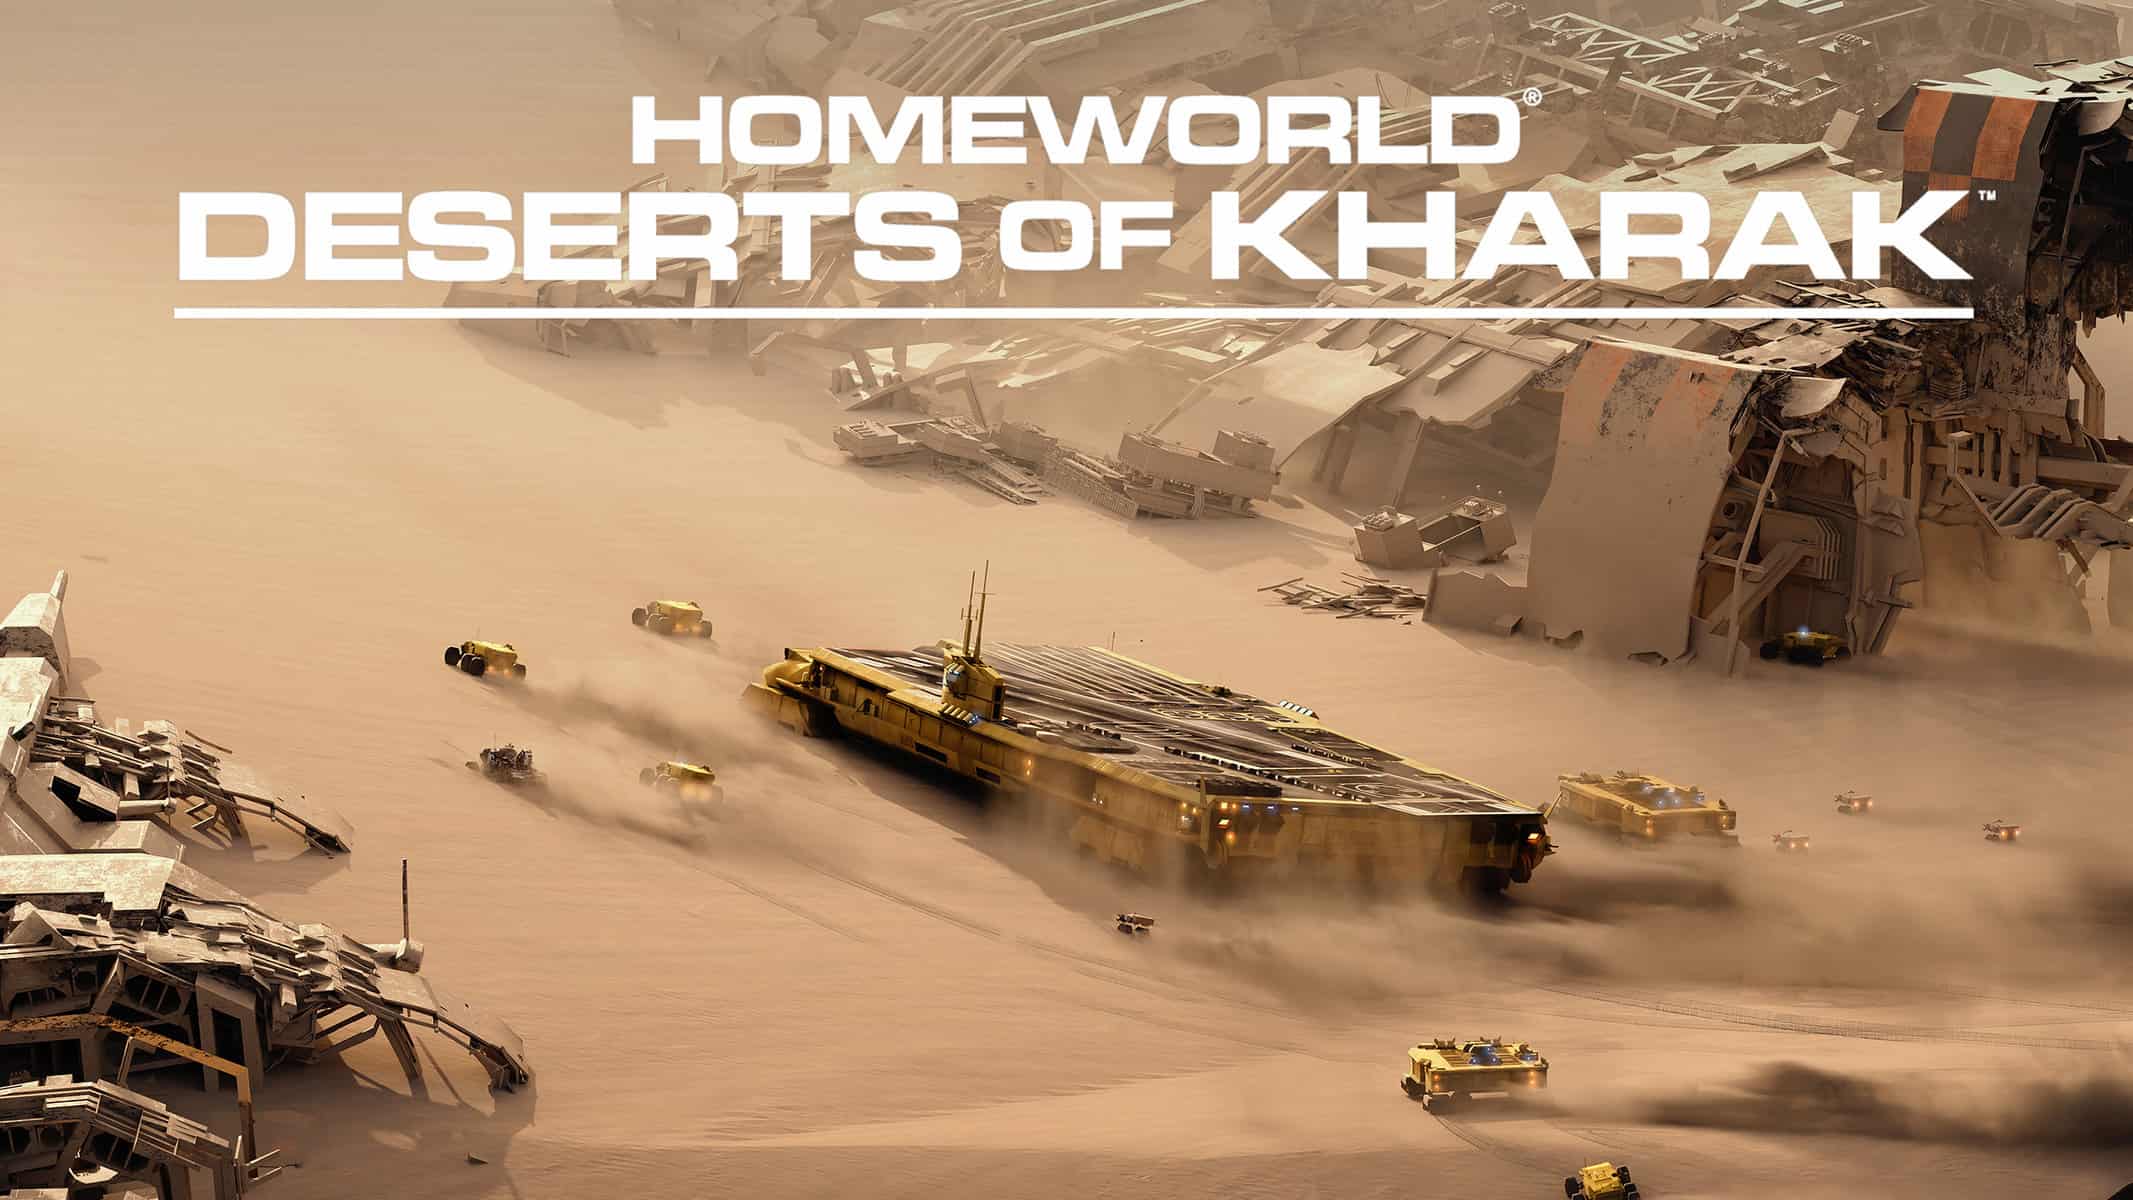 Epic free games: Command and conquer with ‘Homeworld: Deserts of Kharak’